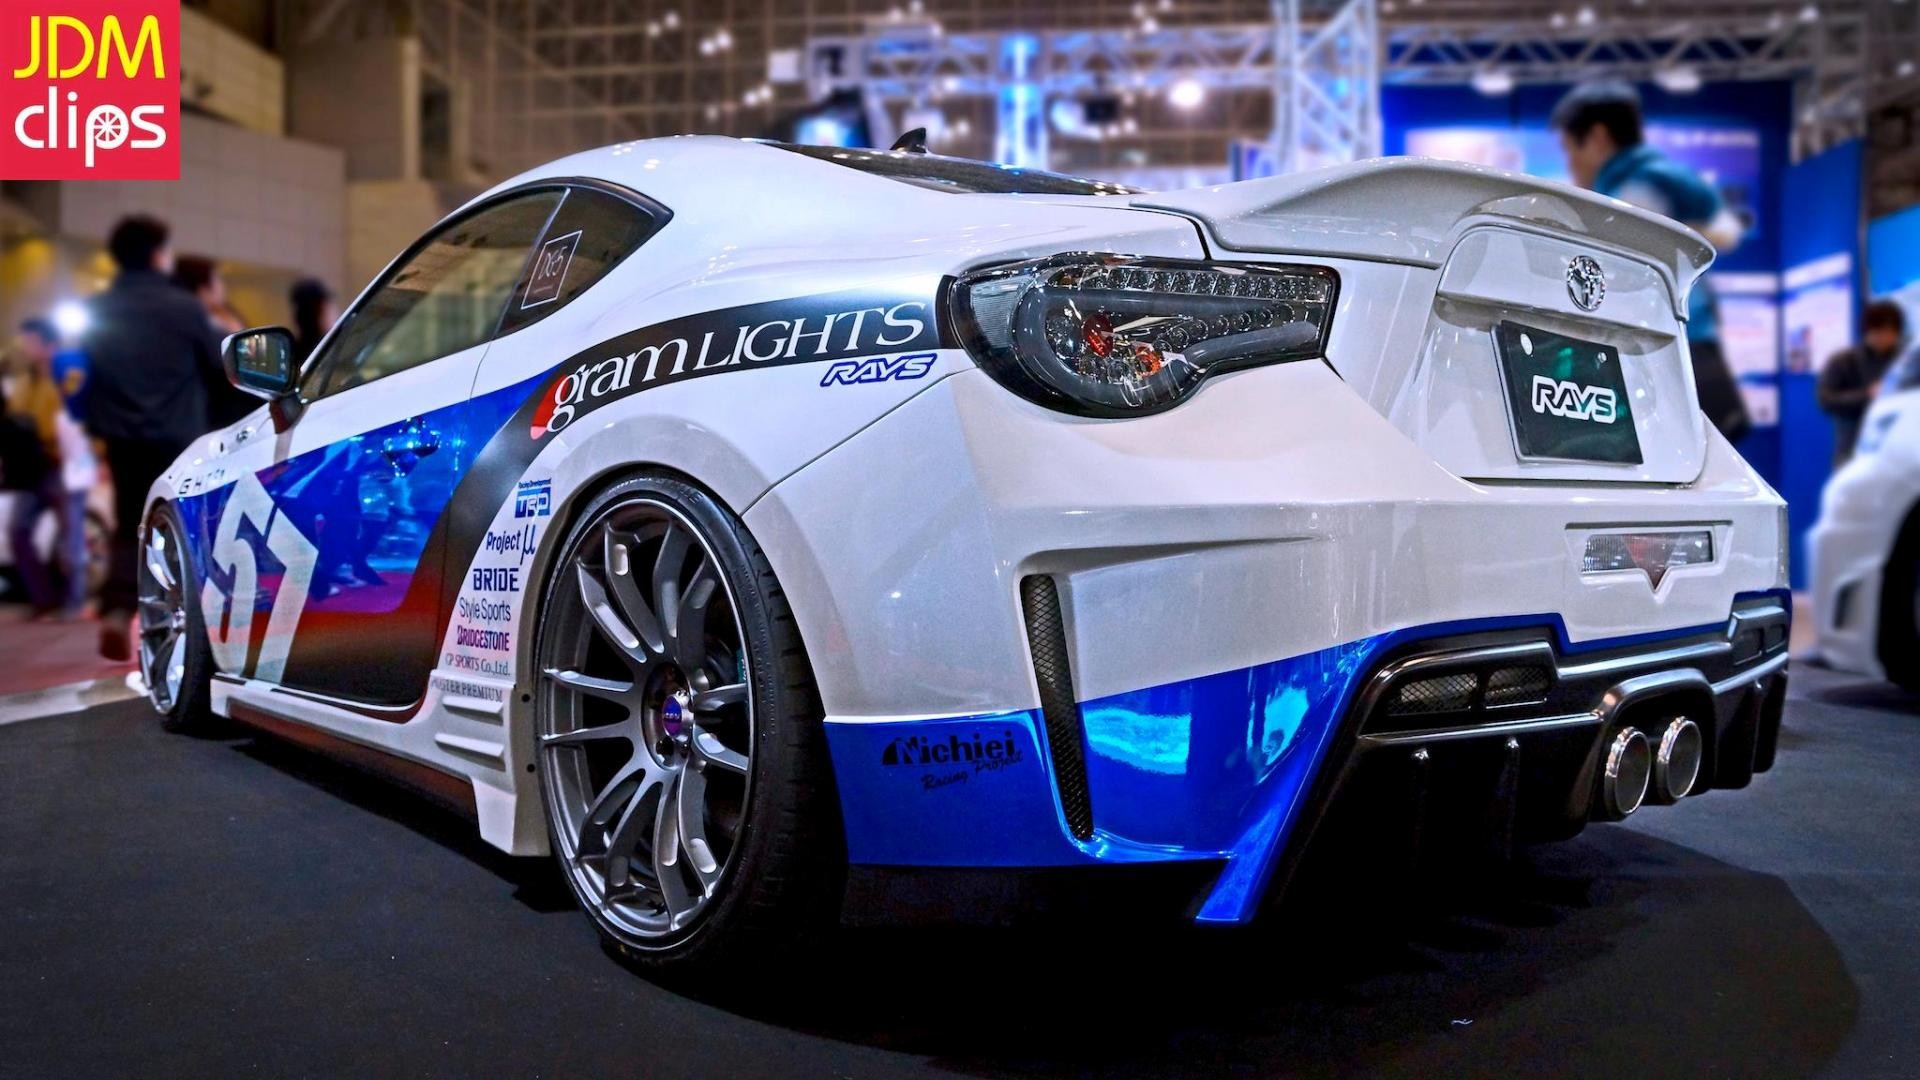 General 1920x1080 Toyota Toyobaru car white cars vehicle watermarked car show Japanese cars livery